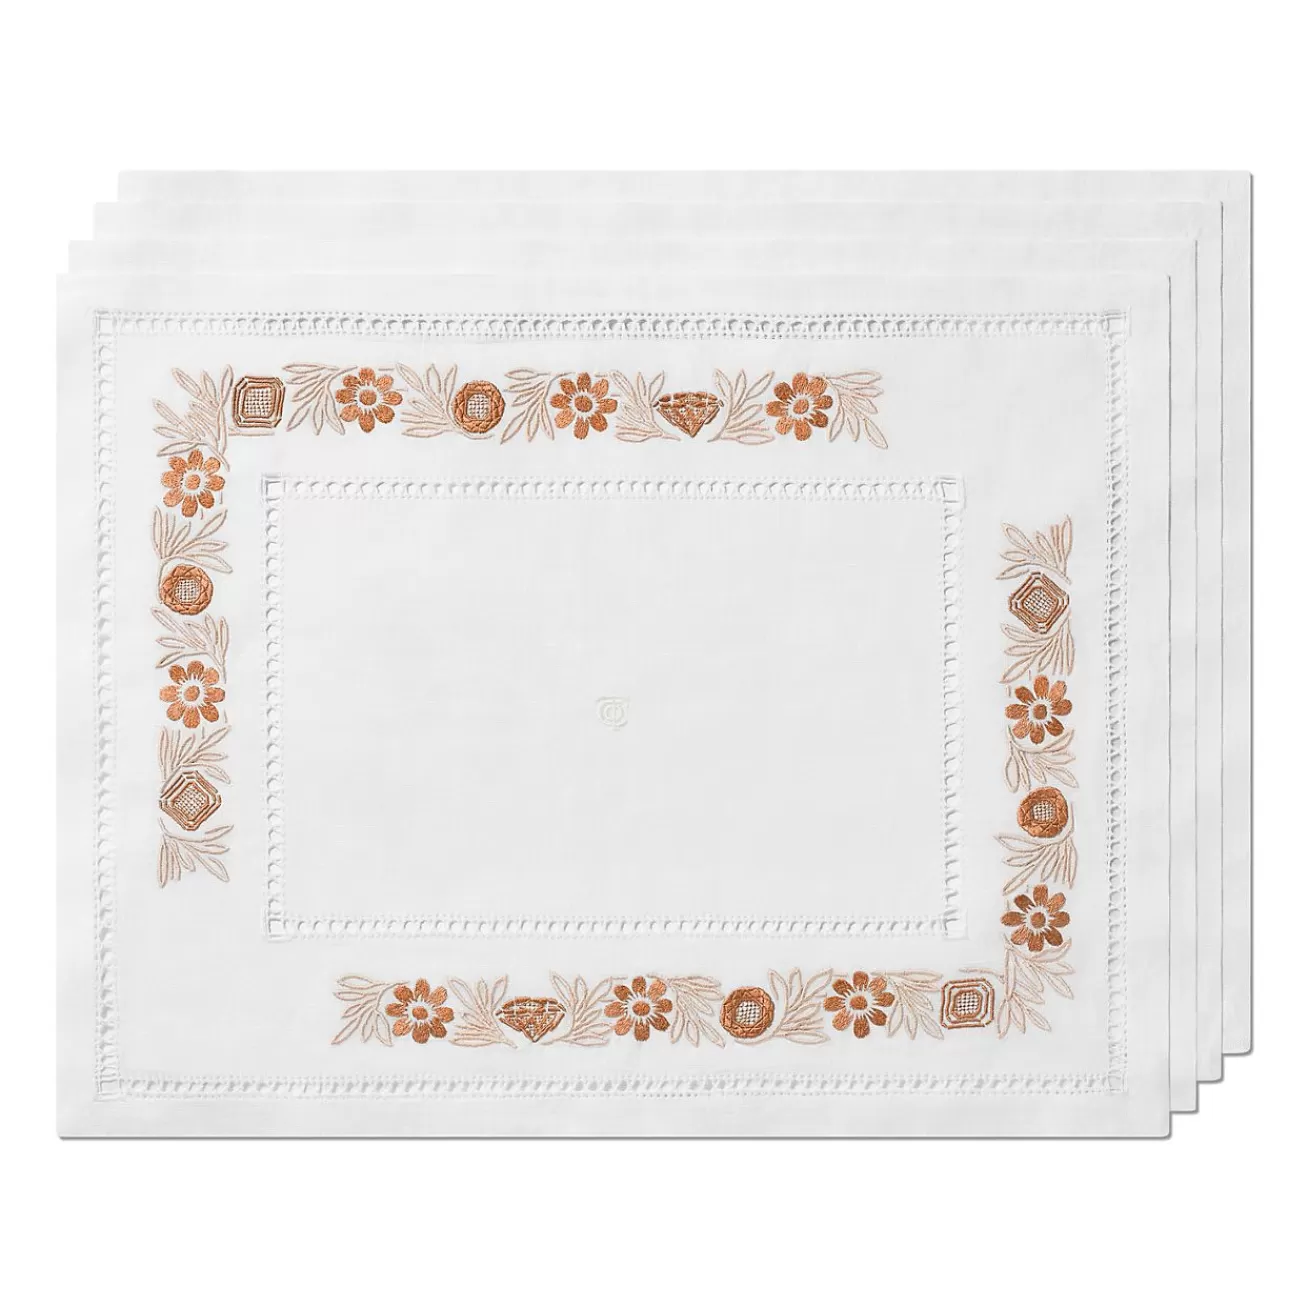 Tiffany & Co. Tiffany Heritage Place Mats Set of Four, in Carnelian Linen | ^ Table Linens